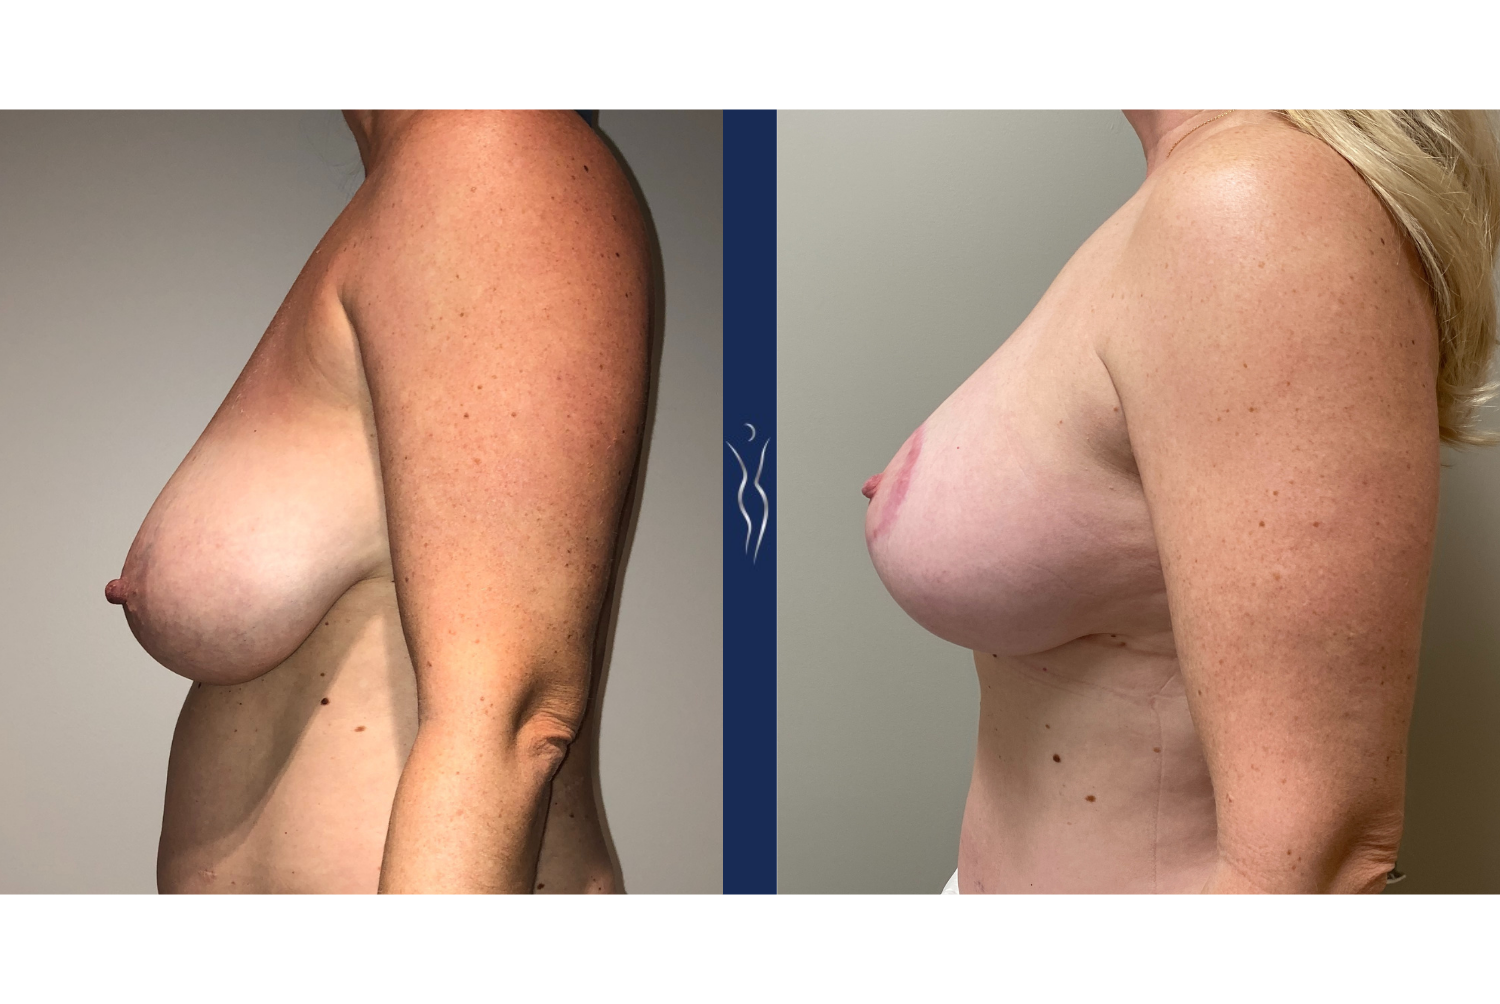 46 year old lady breast augmentation with lift left lateral 3 months